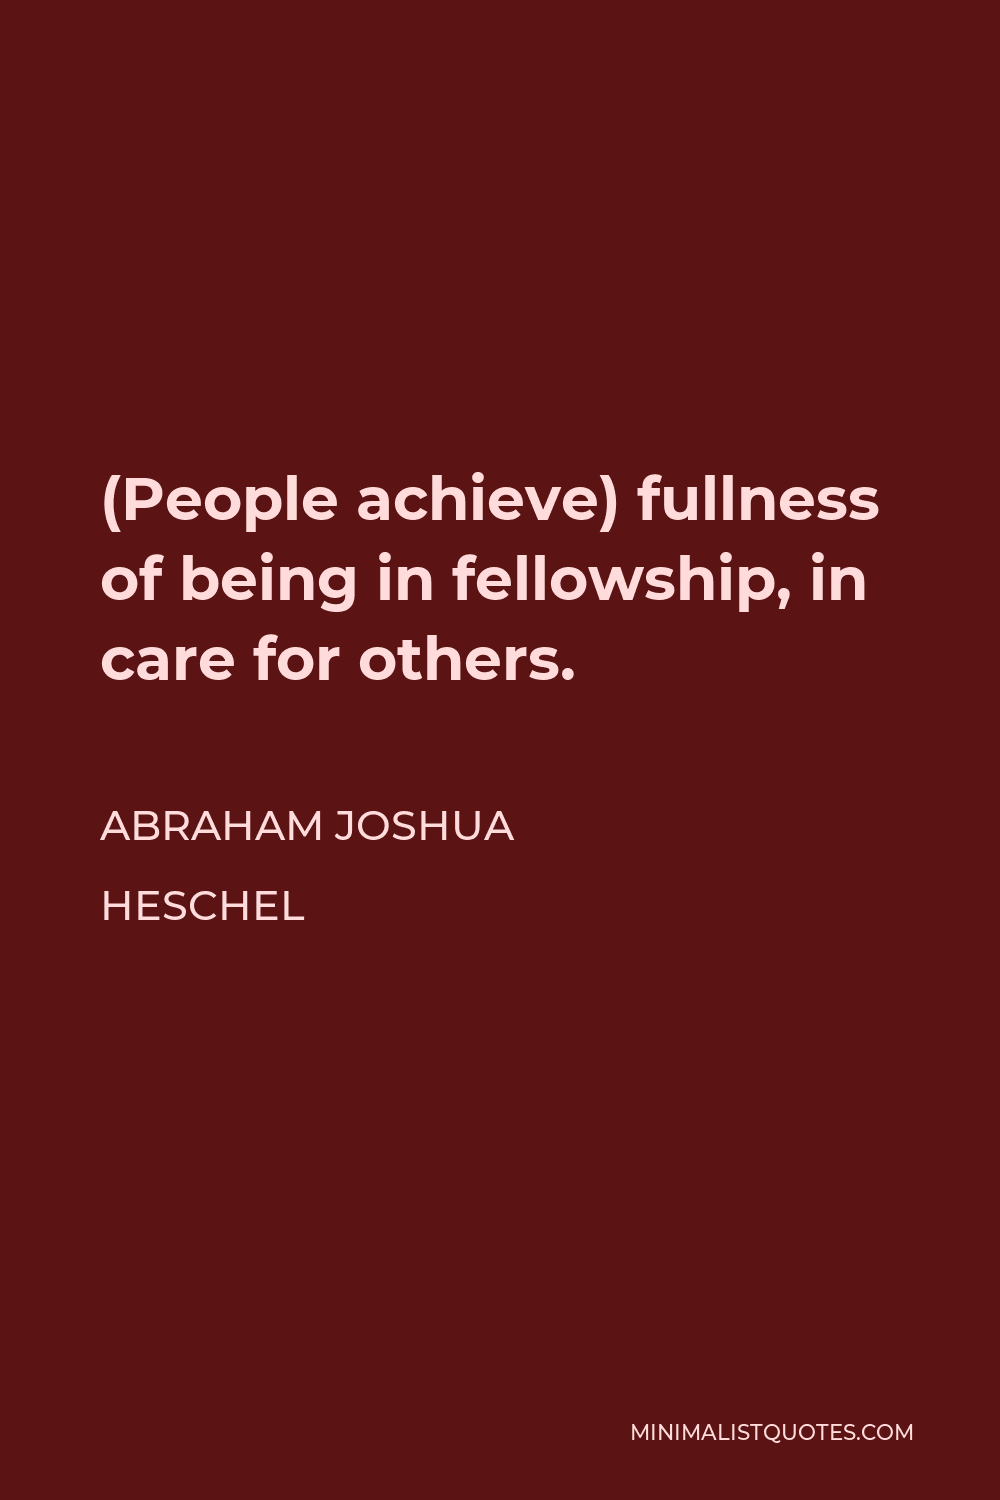 Abraham Joshua Heschel Quote - (People achieve) fullness of being in fellowship, in care for others.